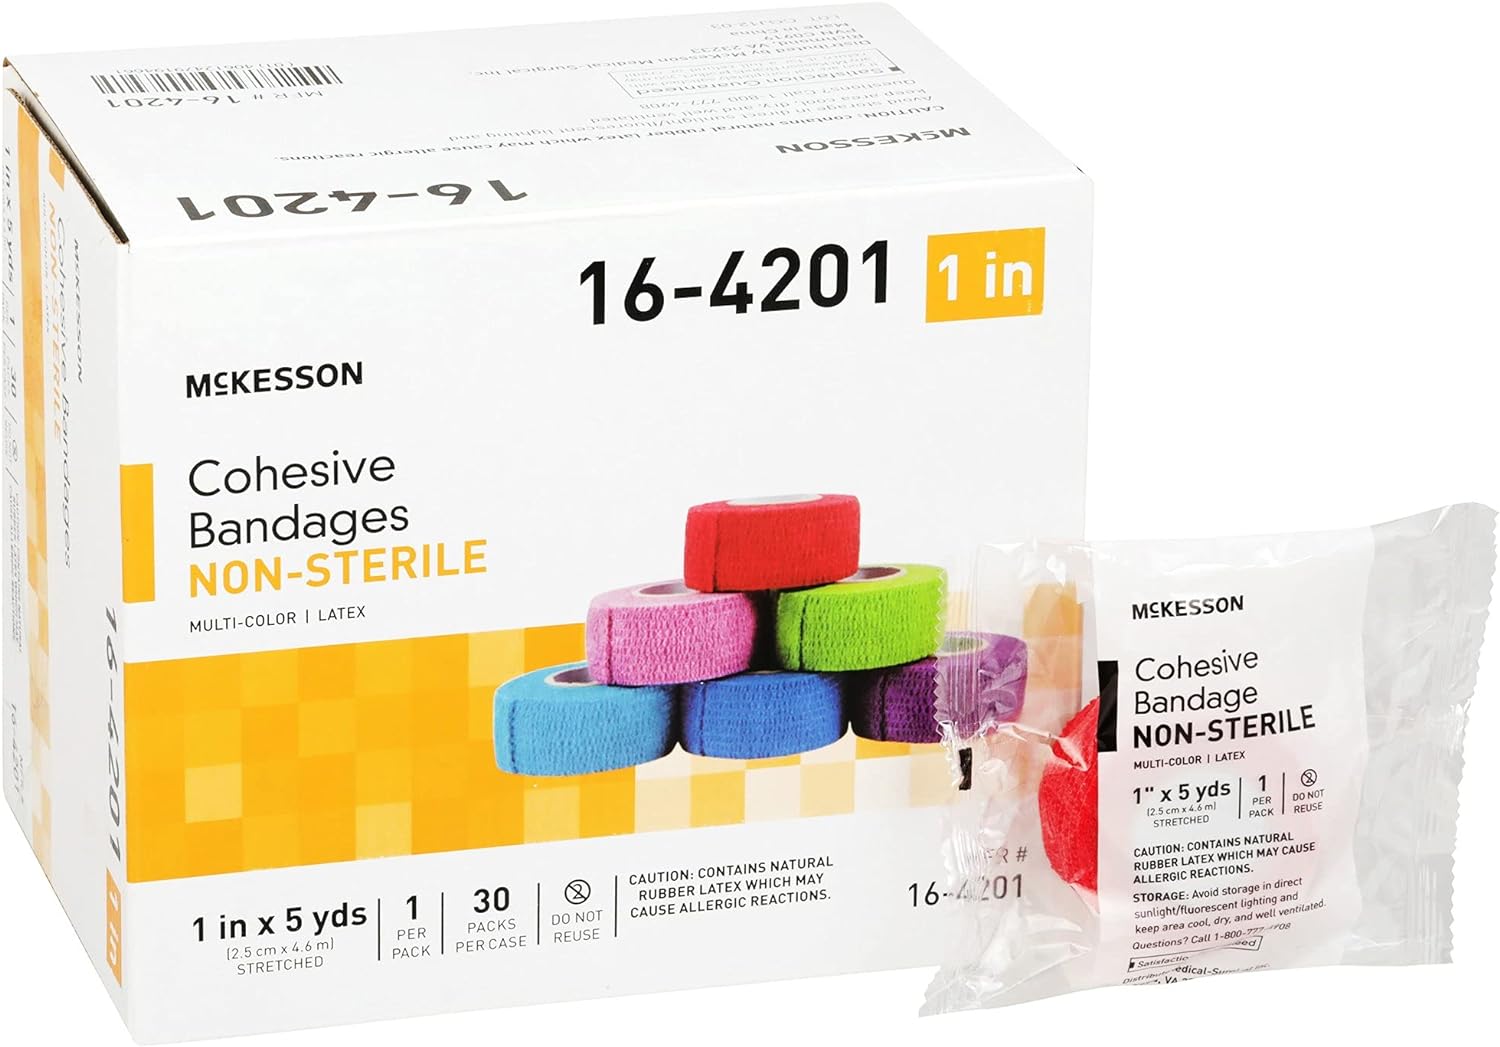 McKesson Cohesive Bandage, Non-Sterile, Self-Adherent Closure, Multi-Color, 1 in x 5 yds, 1 Count, 30 Packs, 30 Total